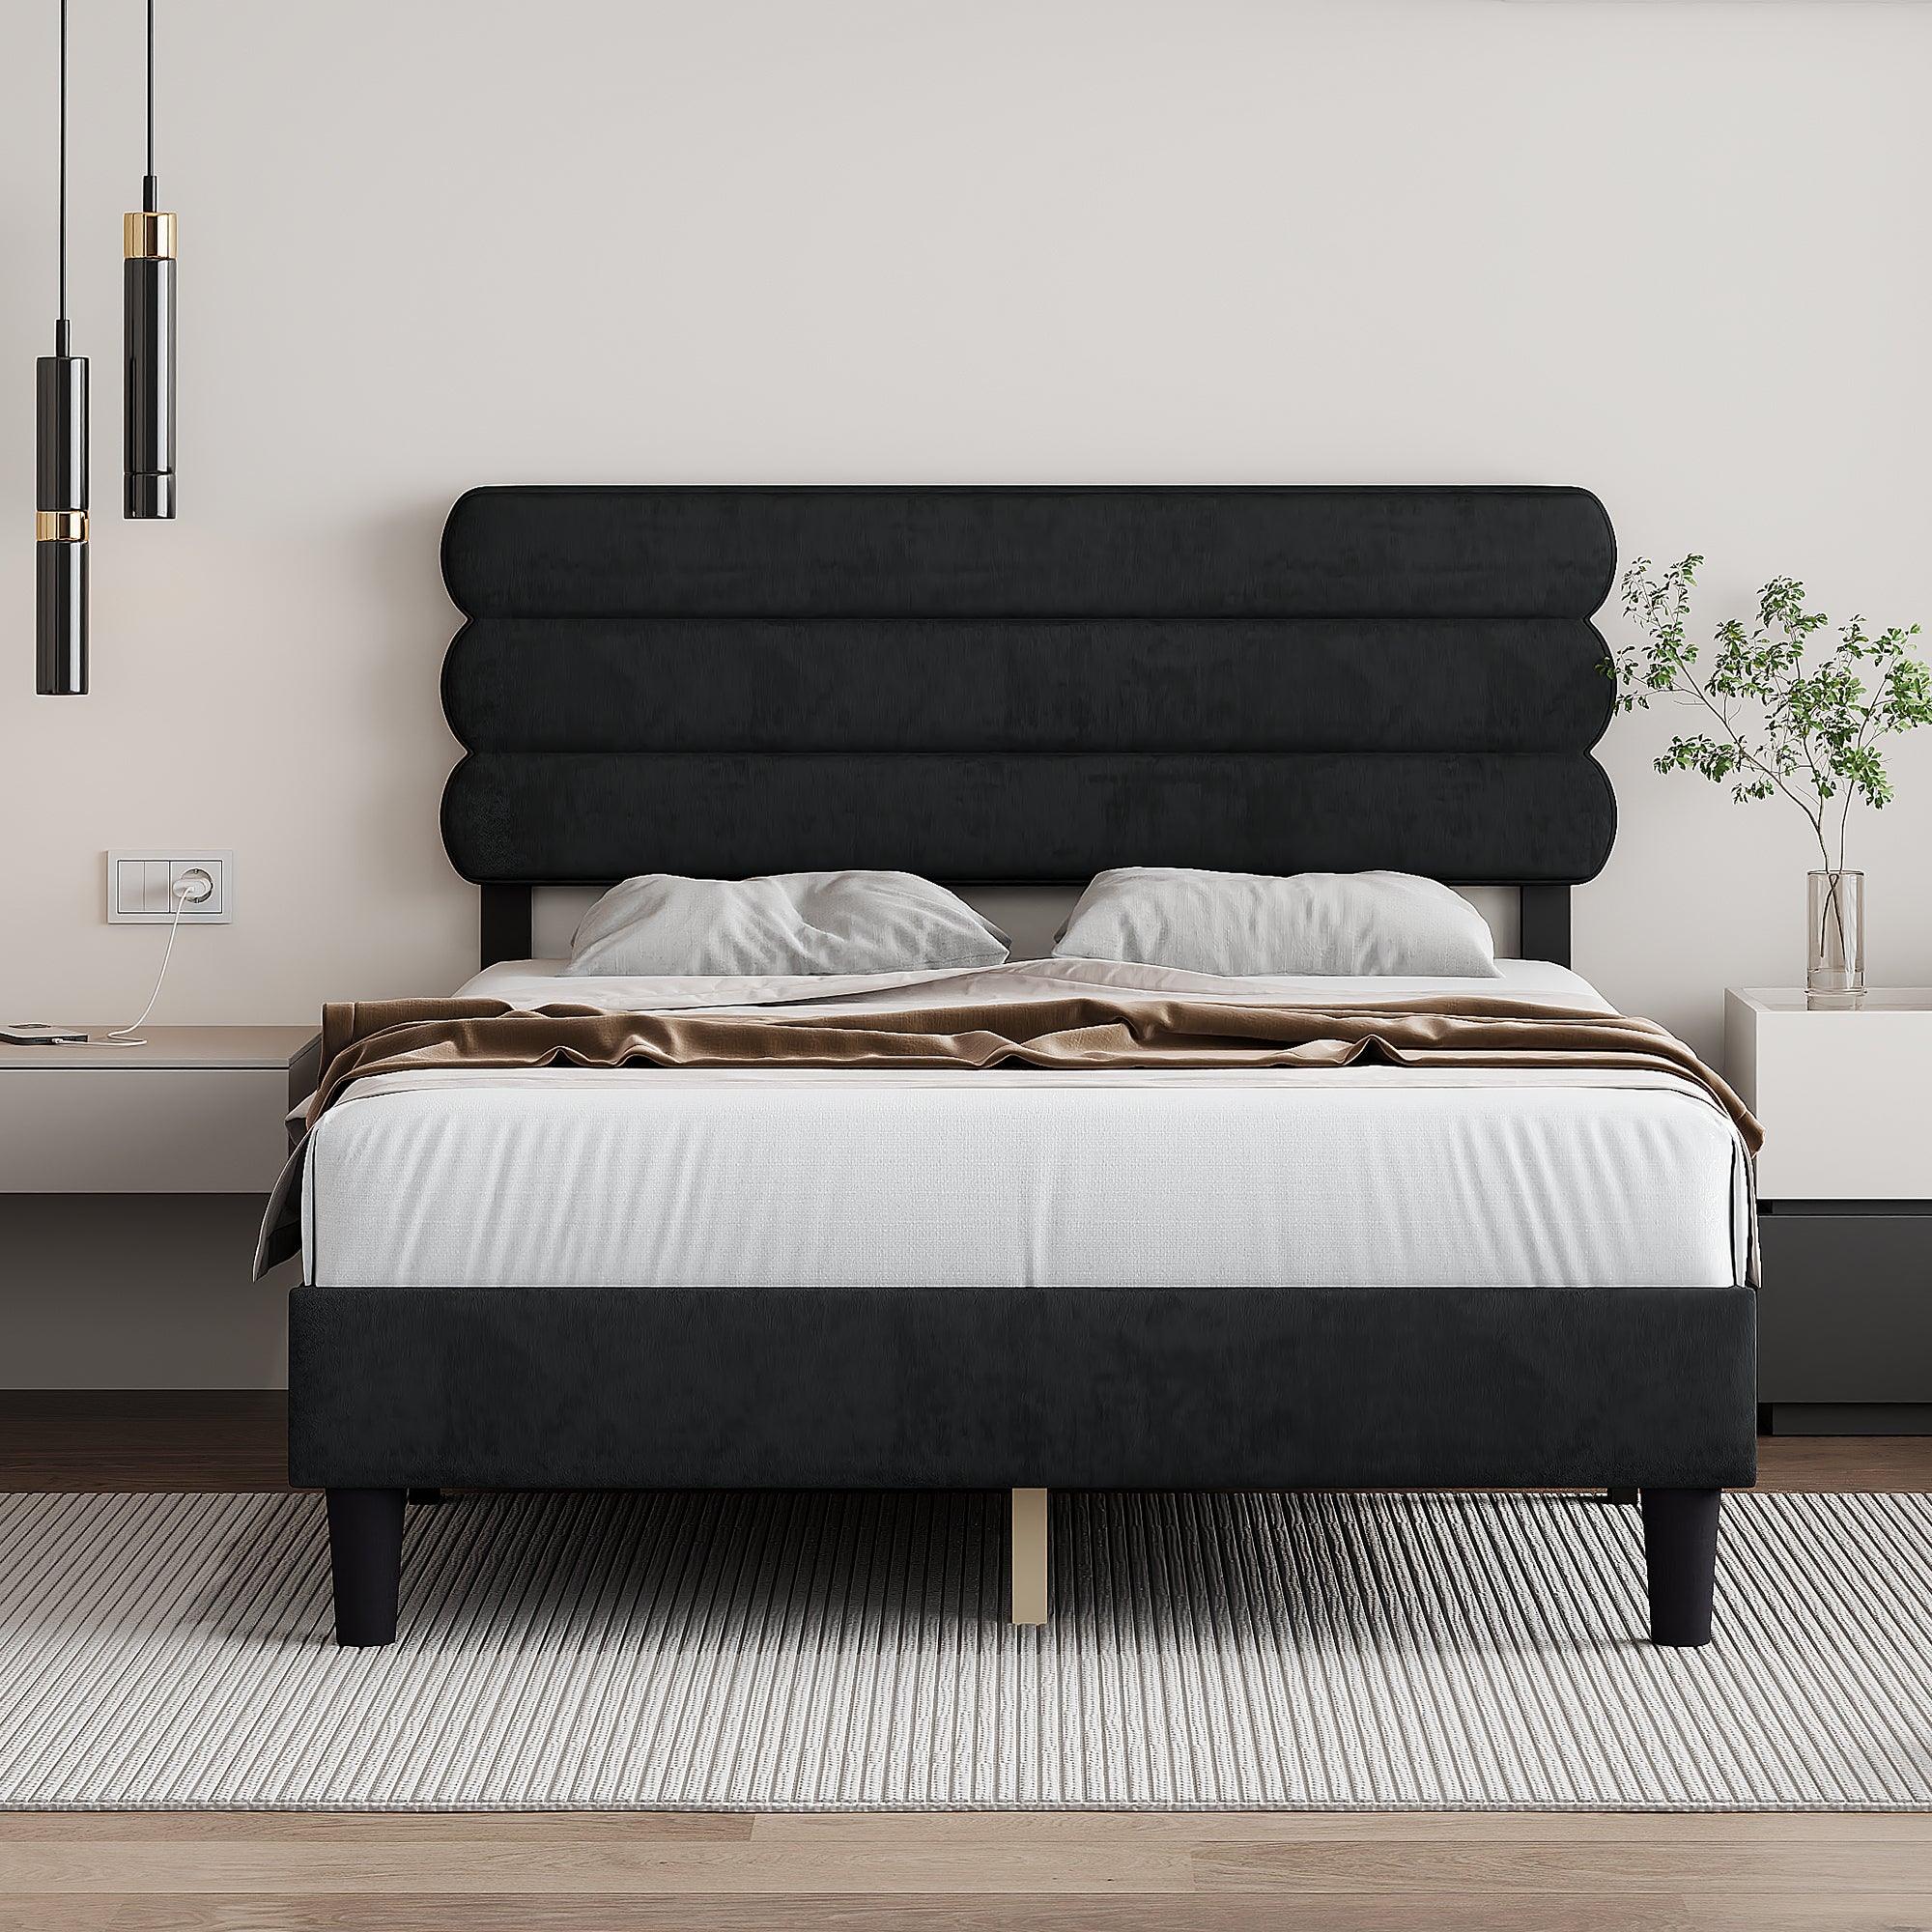 🆓🚛 Queen Bed Frame With Headboard, Sturdy Platform Bed With Wooden Slats Support, Easy Assembly, Dark Gray